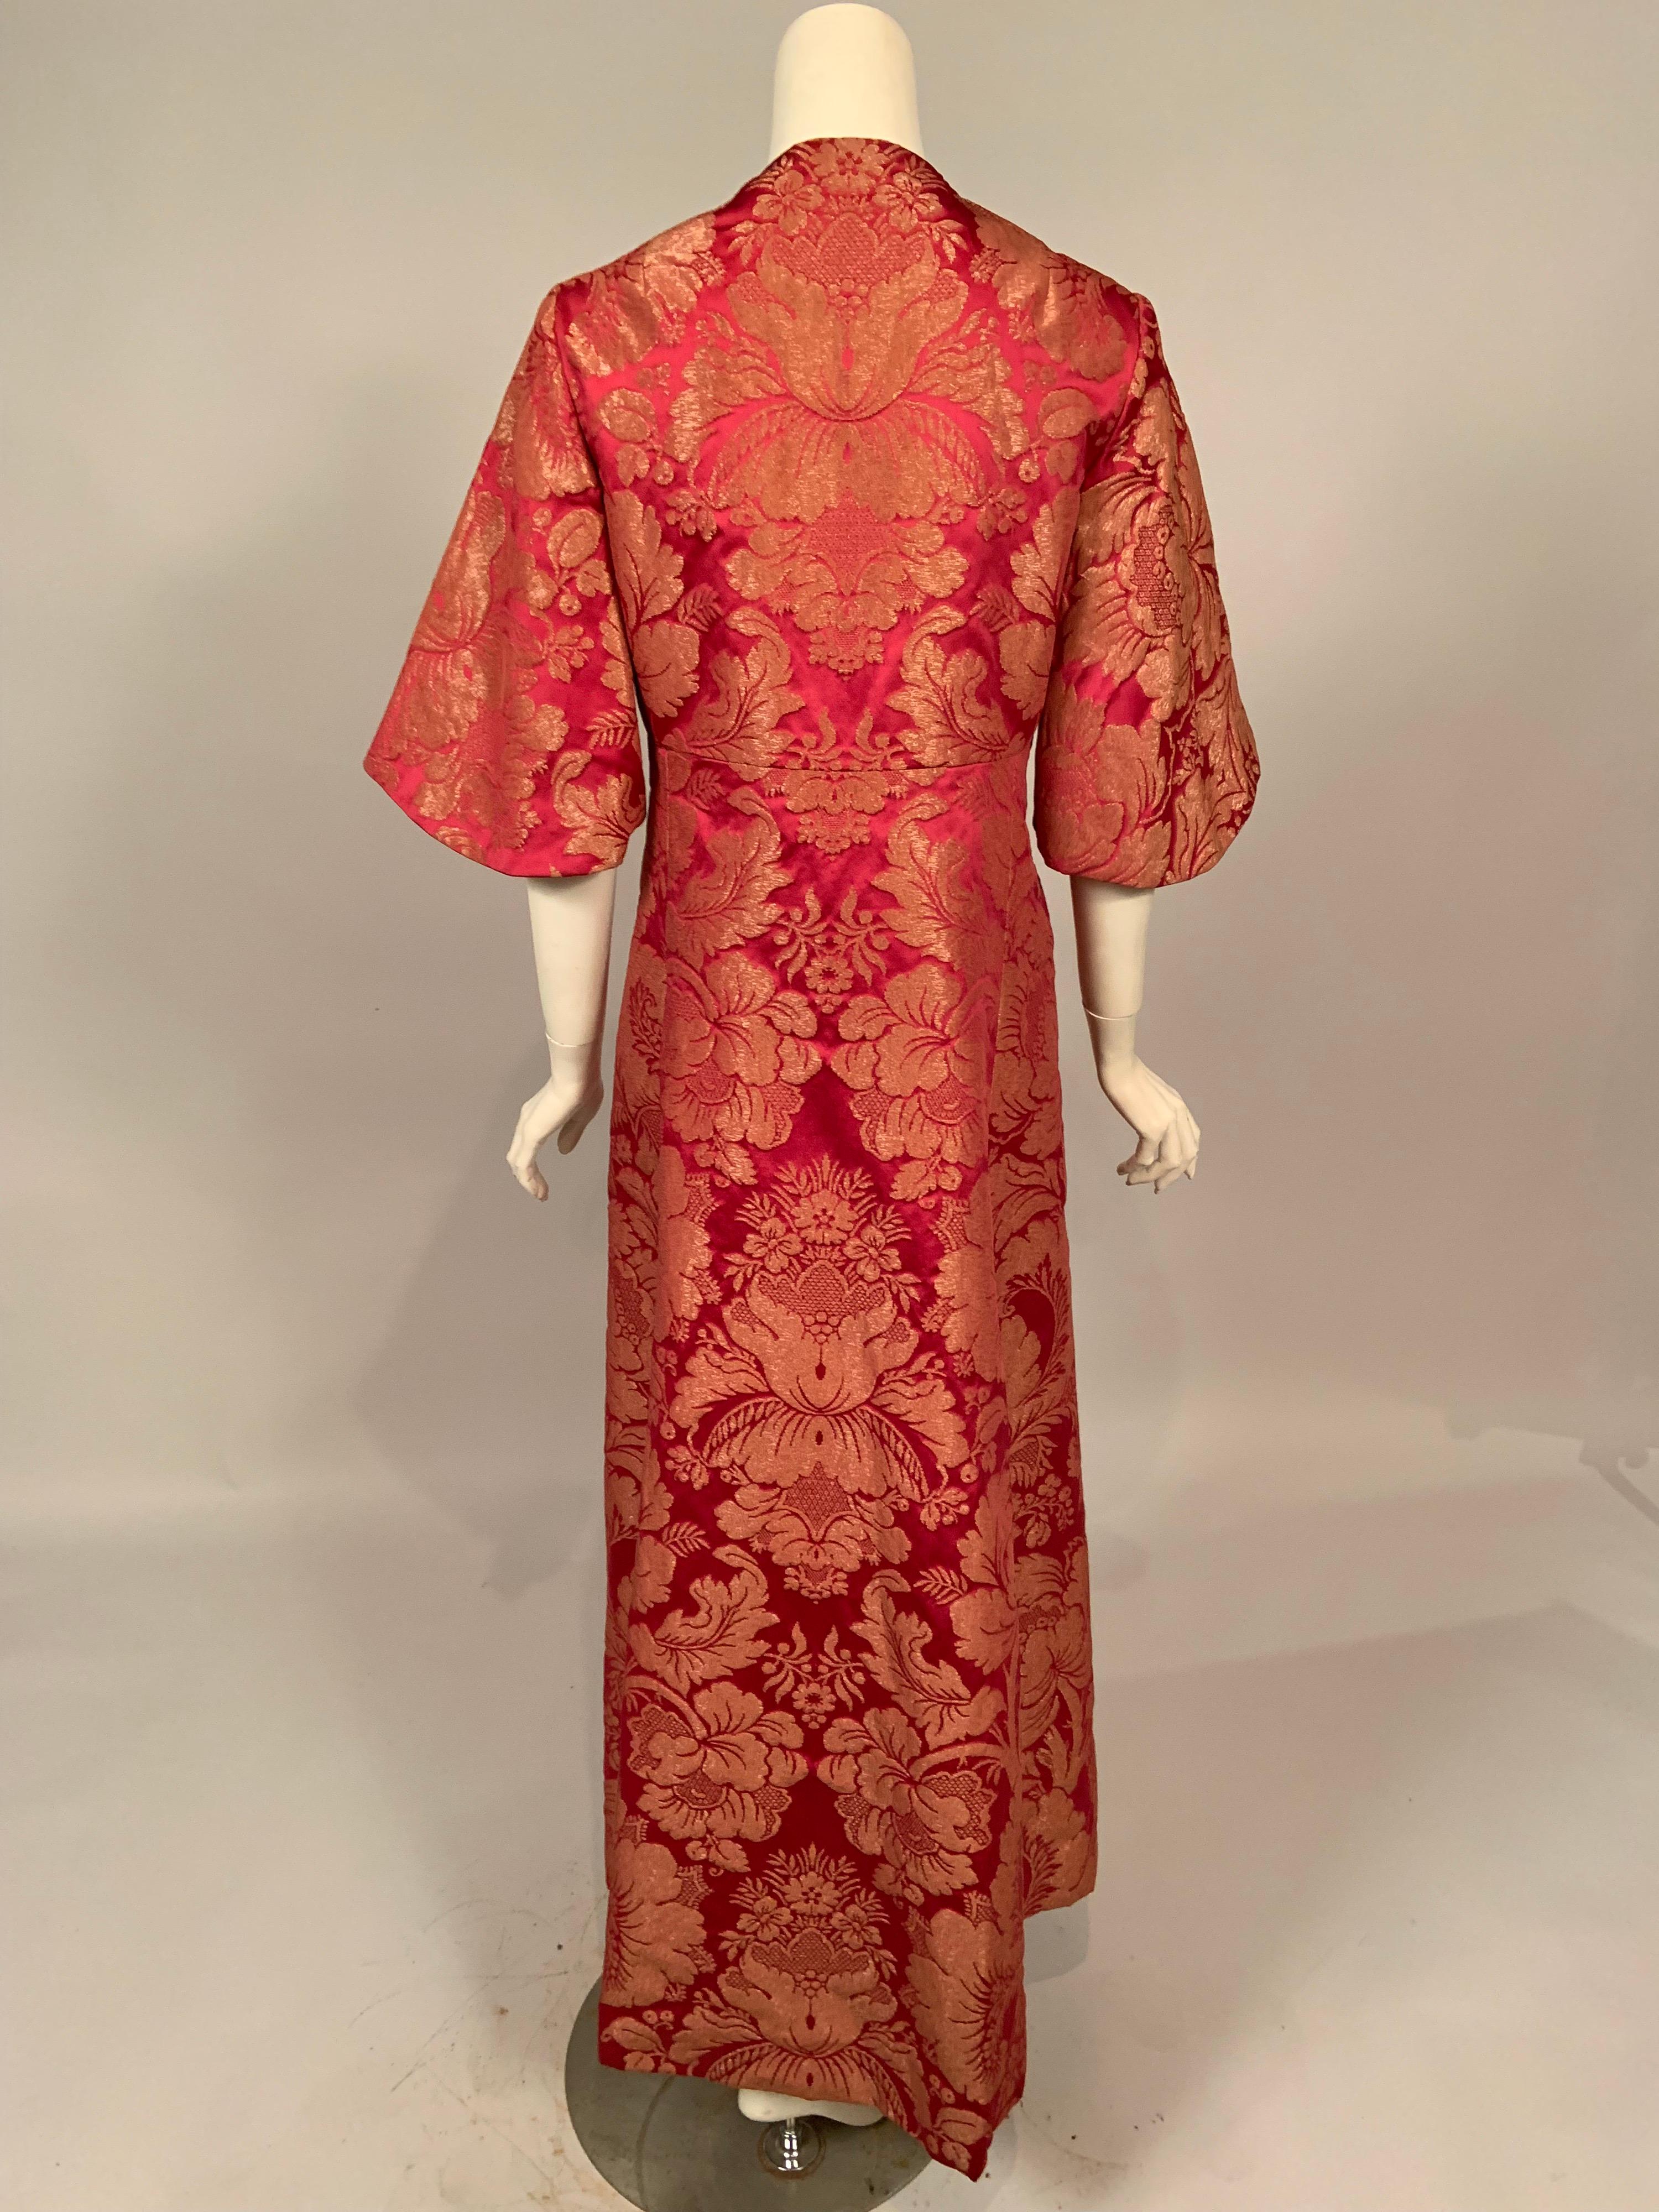 1960's Helena Barbieri Raspberry Red and Woven Metallic Gold Dress and Coat For Sale 7